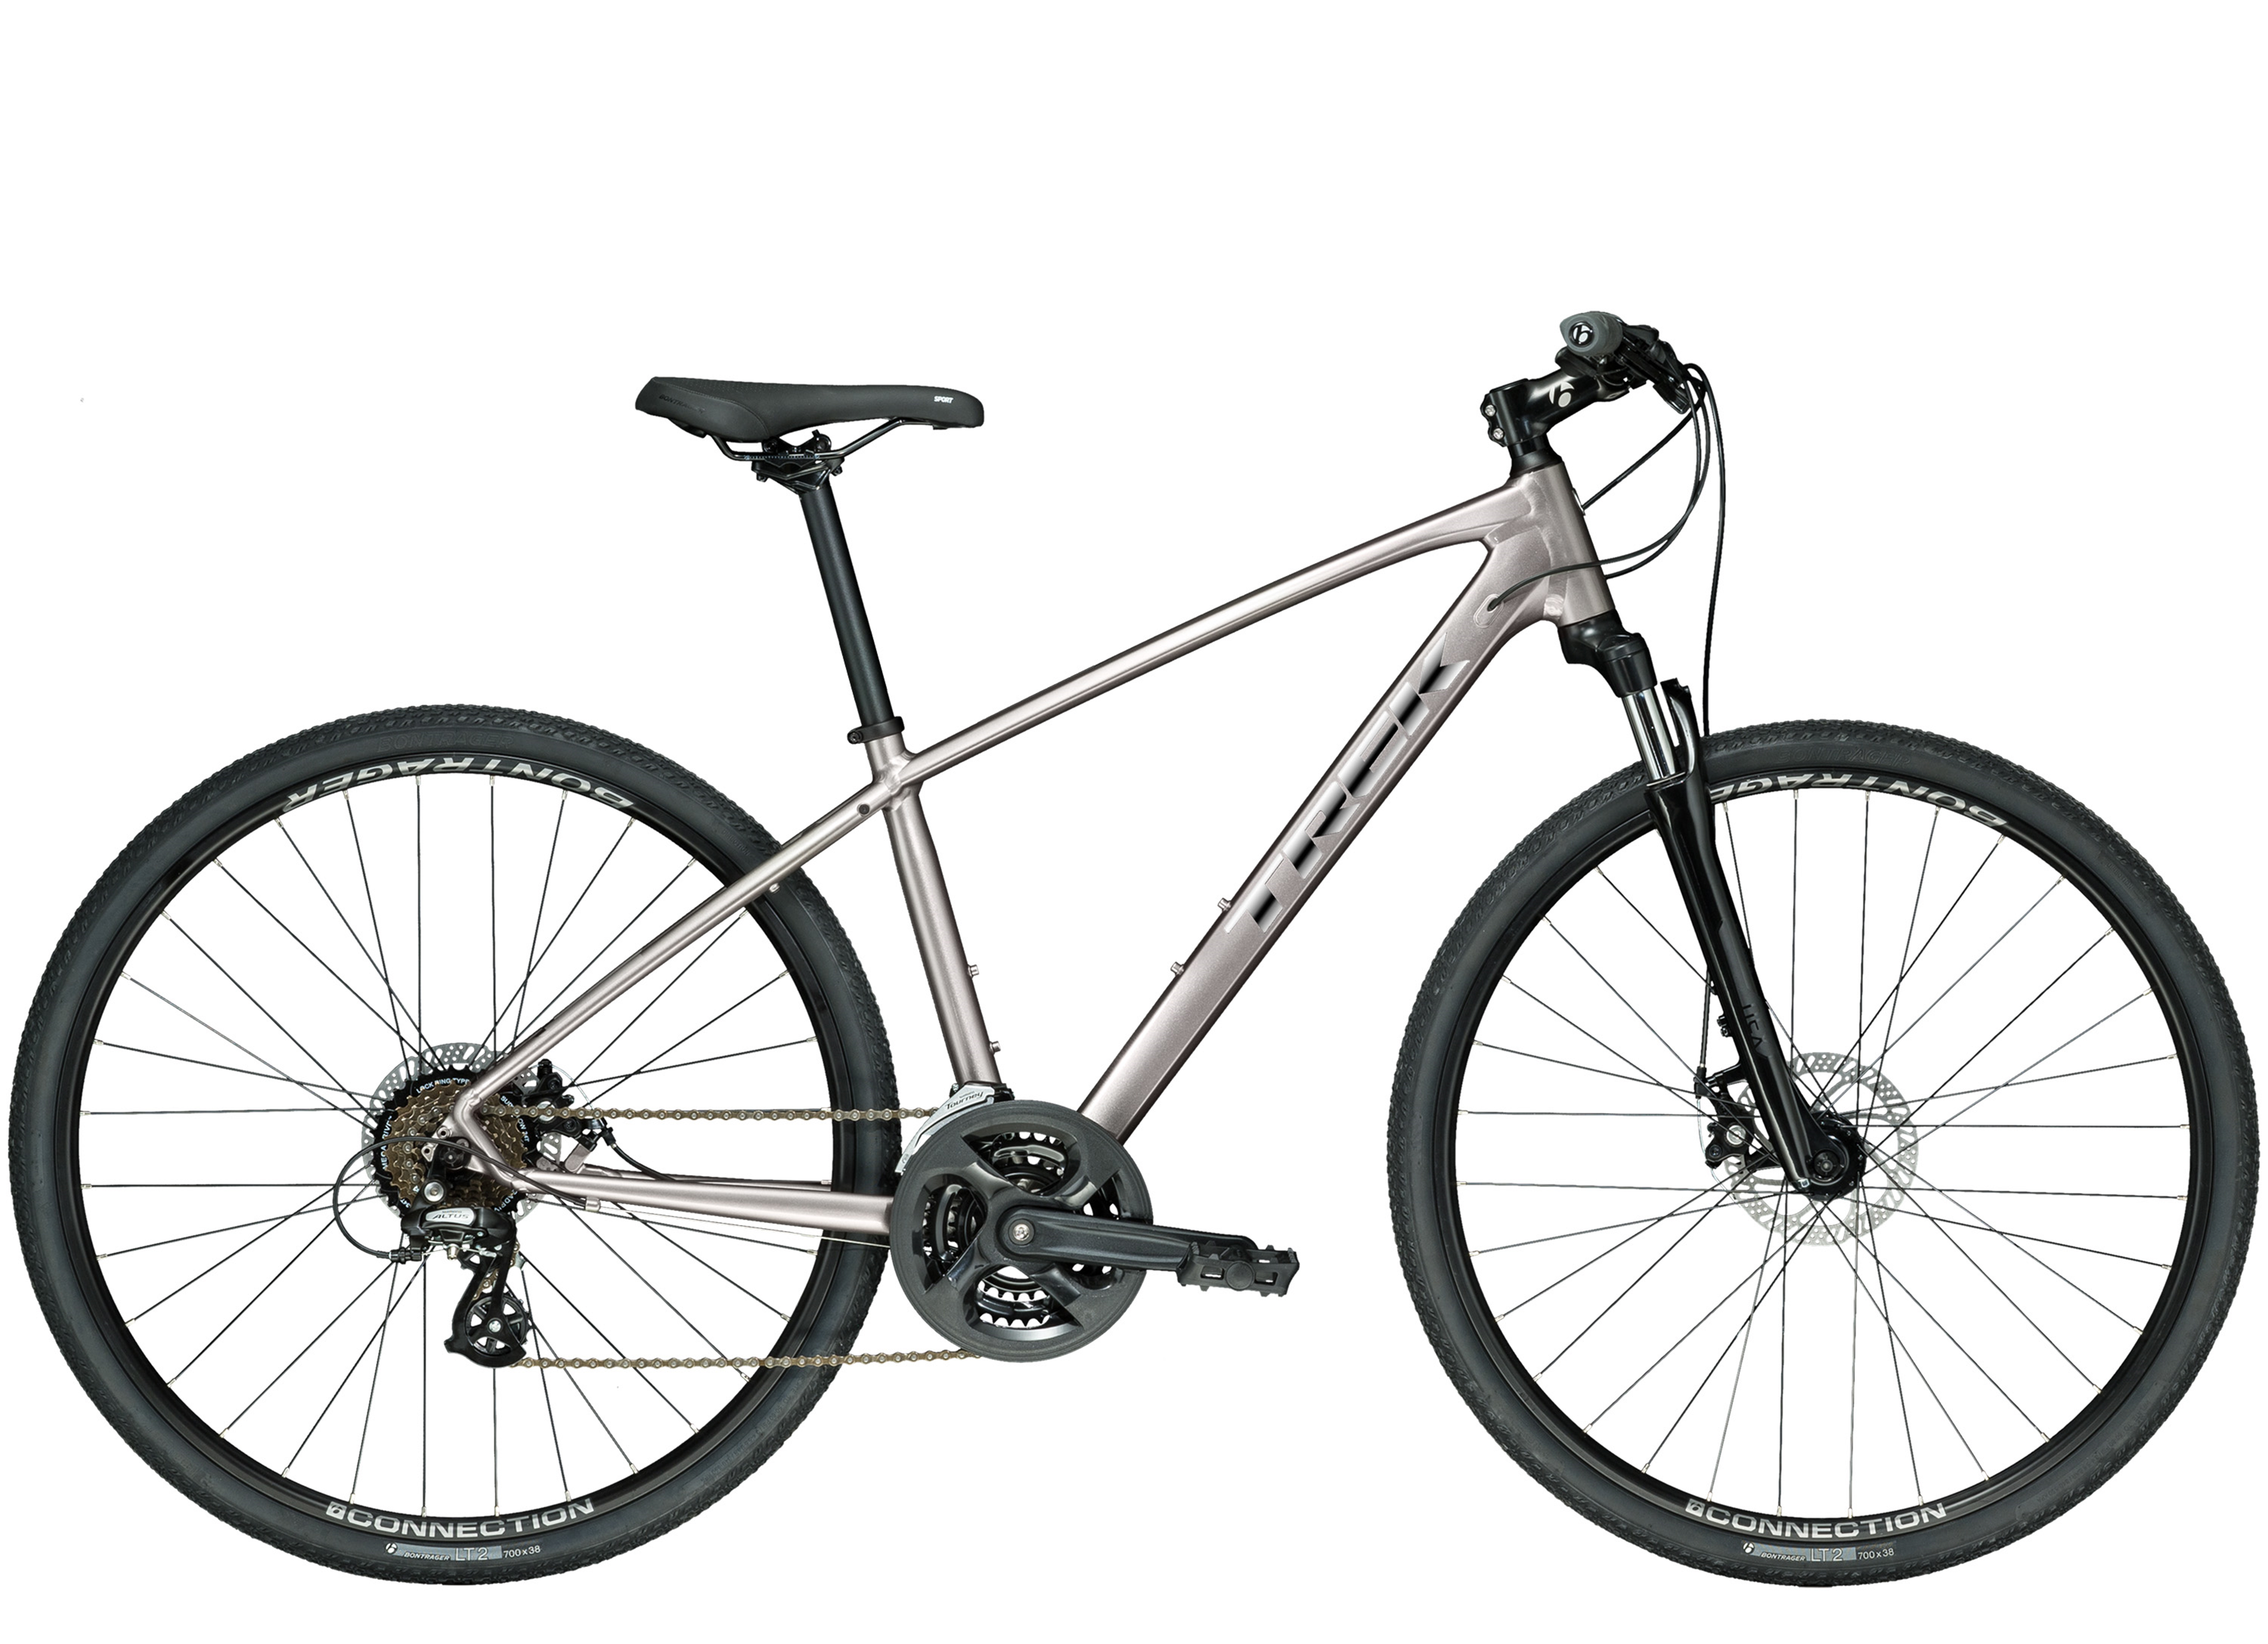 Men's Trek Dual Sport 1 DISC - all-road capability rolling from path 